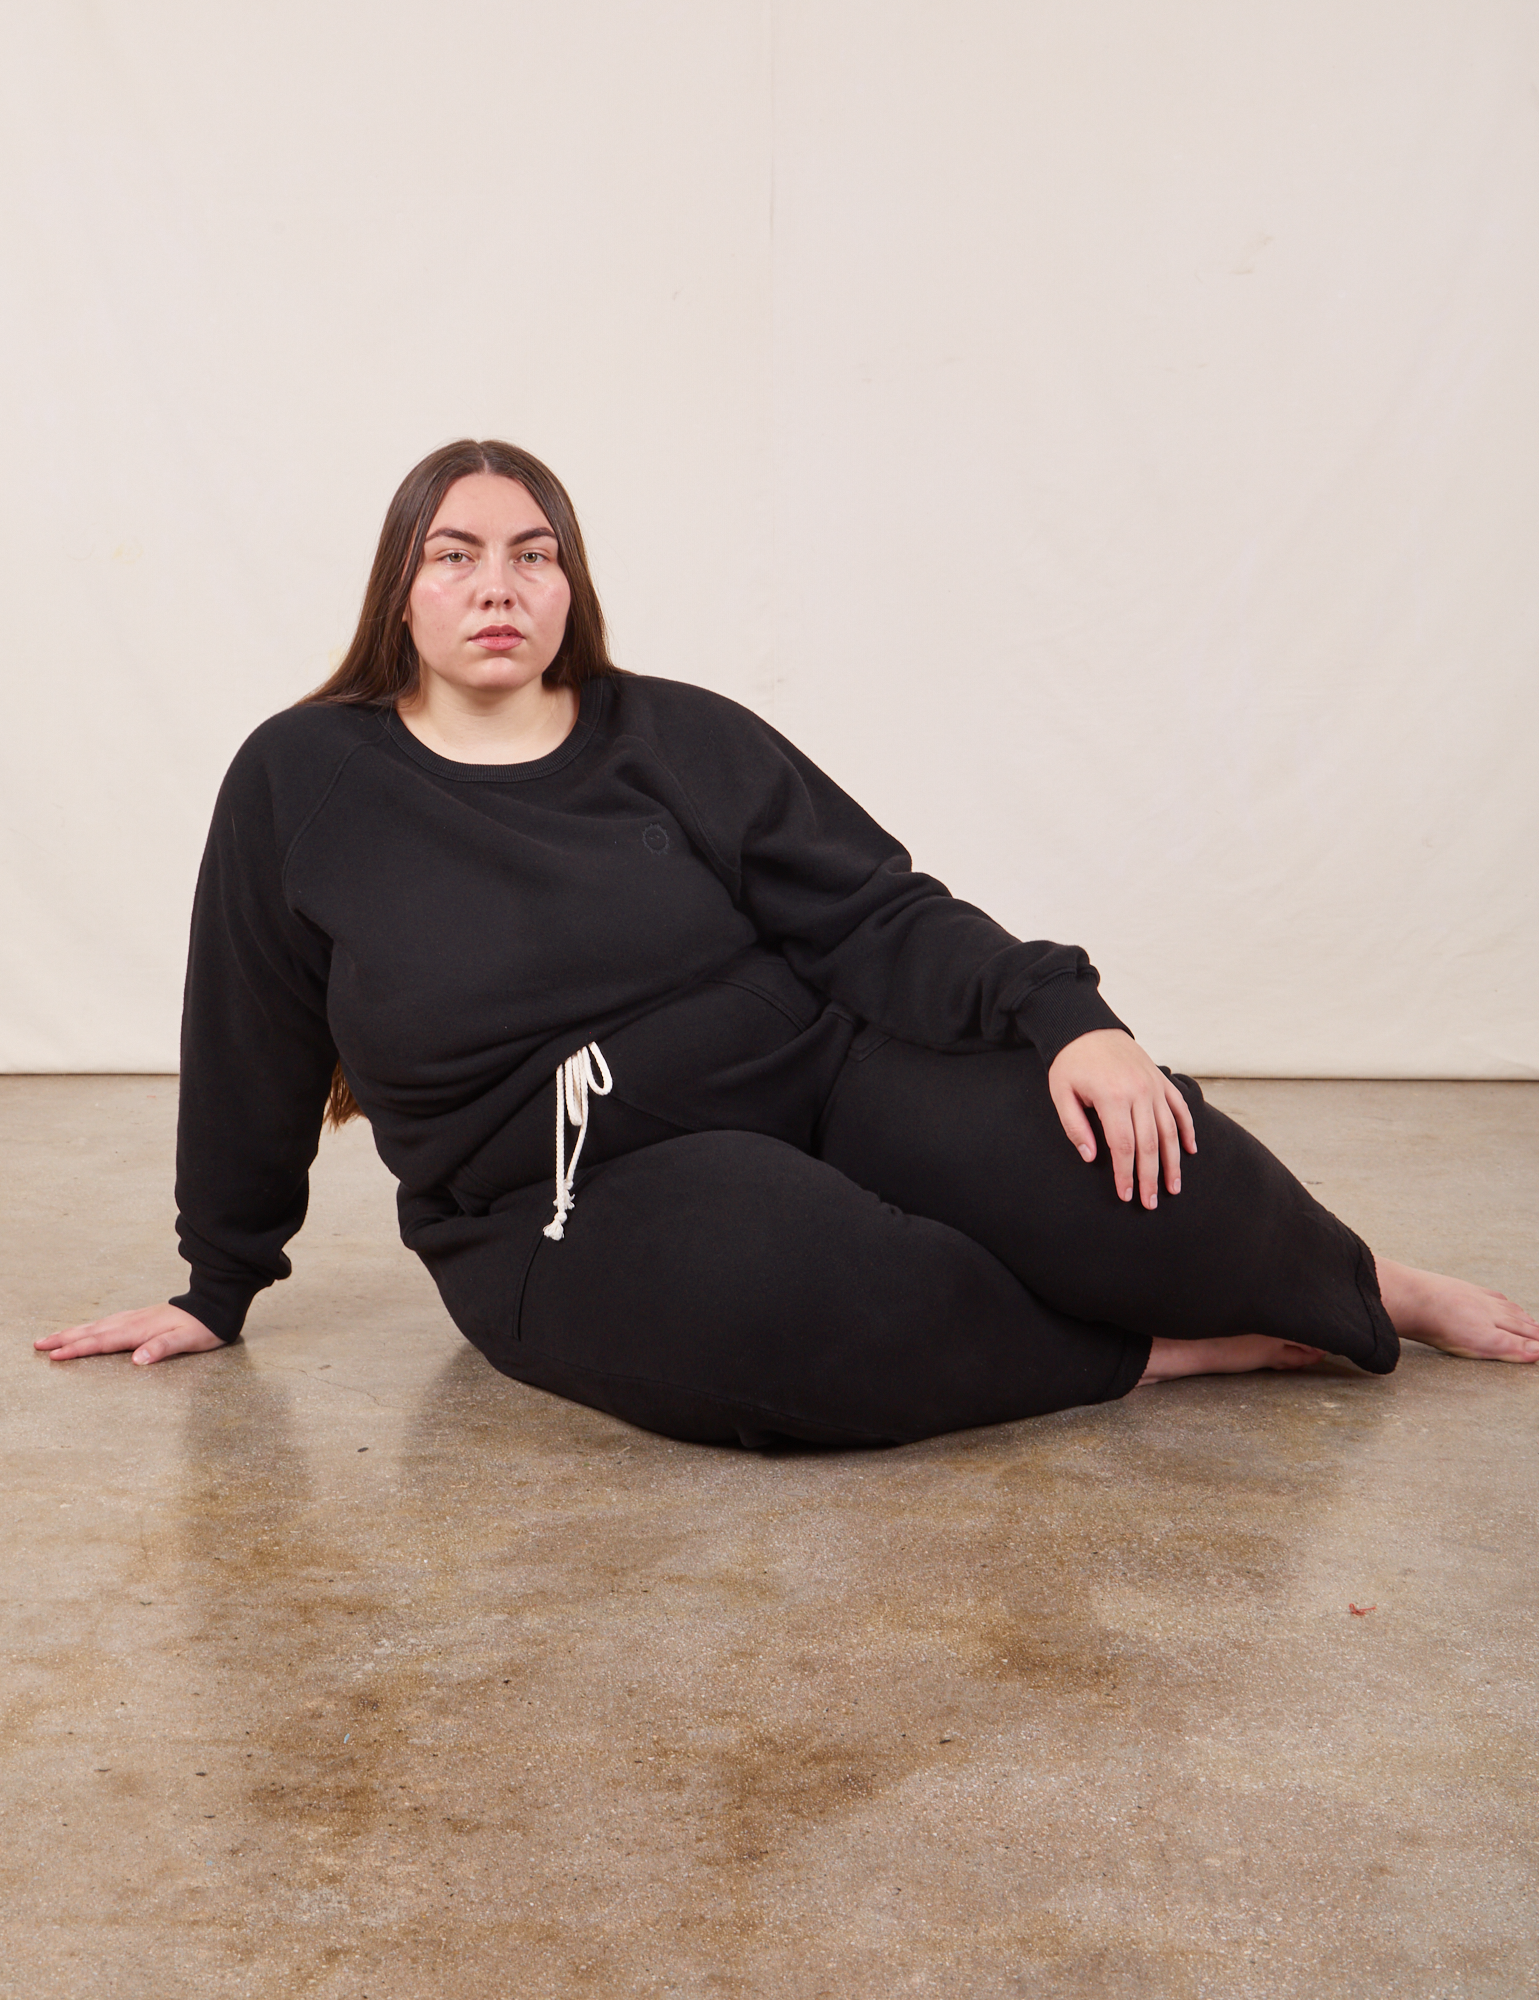 Marielena is wearing Heavyweight Crew in Basic Black and Cropped Rolled Cuff Sweatpants